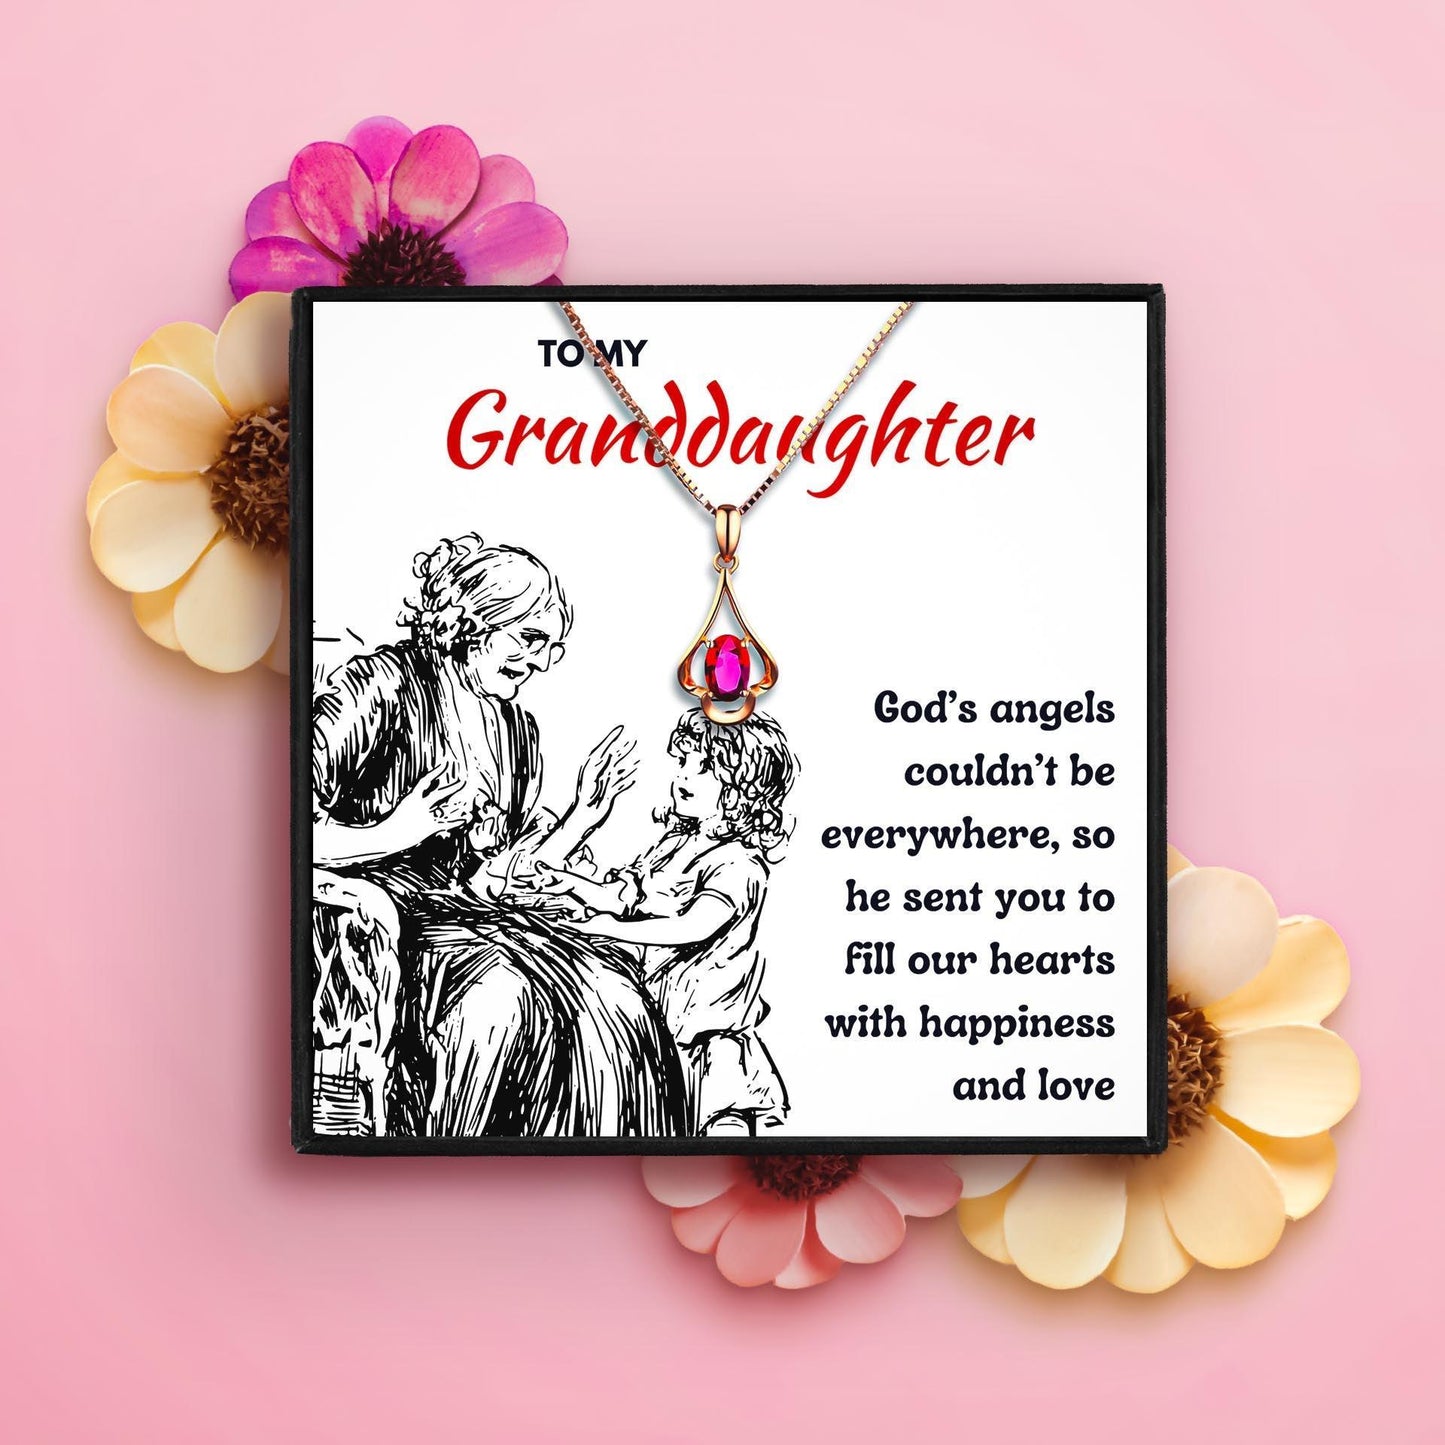 Gifts for Granddaughter That They'll Extremely Want for Christmas 2023 | Gifts for Granddaughter That They'll Extremely Want - undefined | granddaughter gift, granddaughter gifts from nana, Granddaughter Necklace, great granddaughter gifts, jewelry for granddaughter from grandmother | From Hunny Life | hunnylife.com